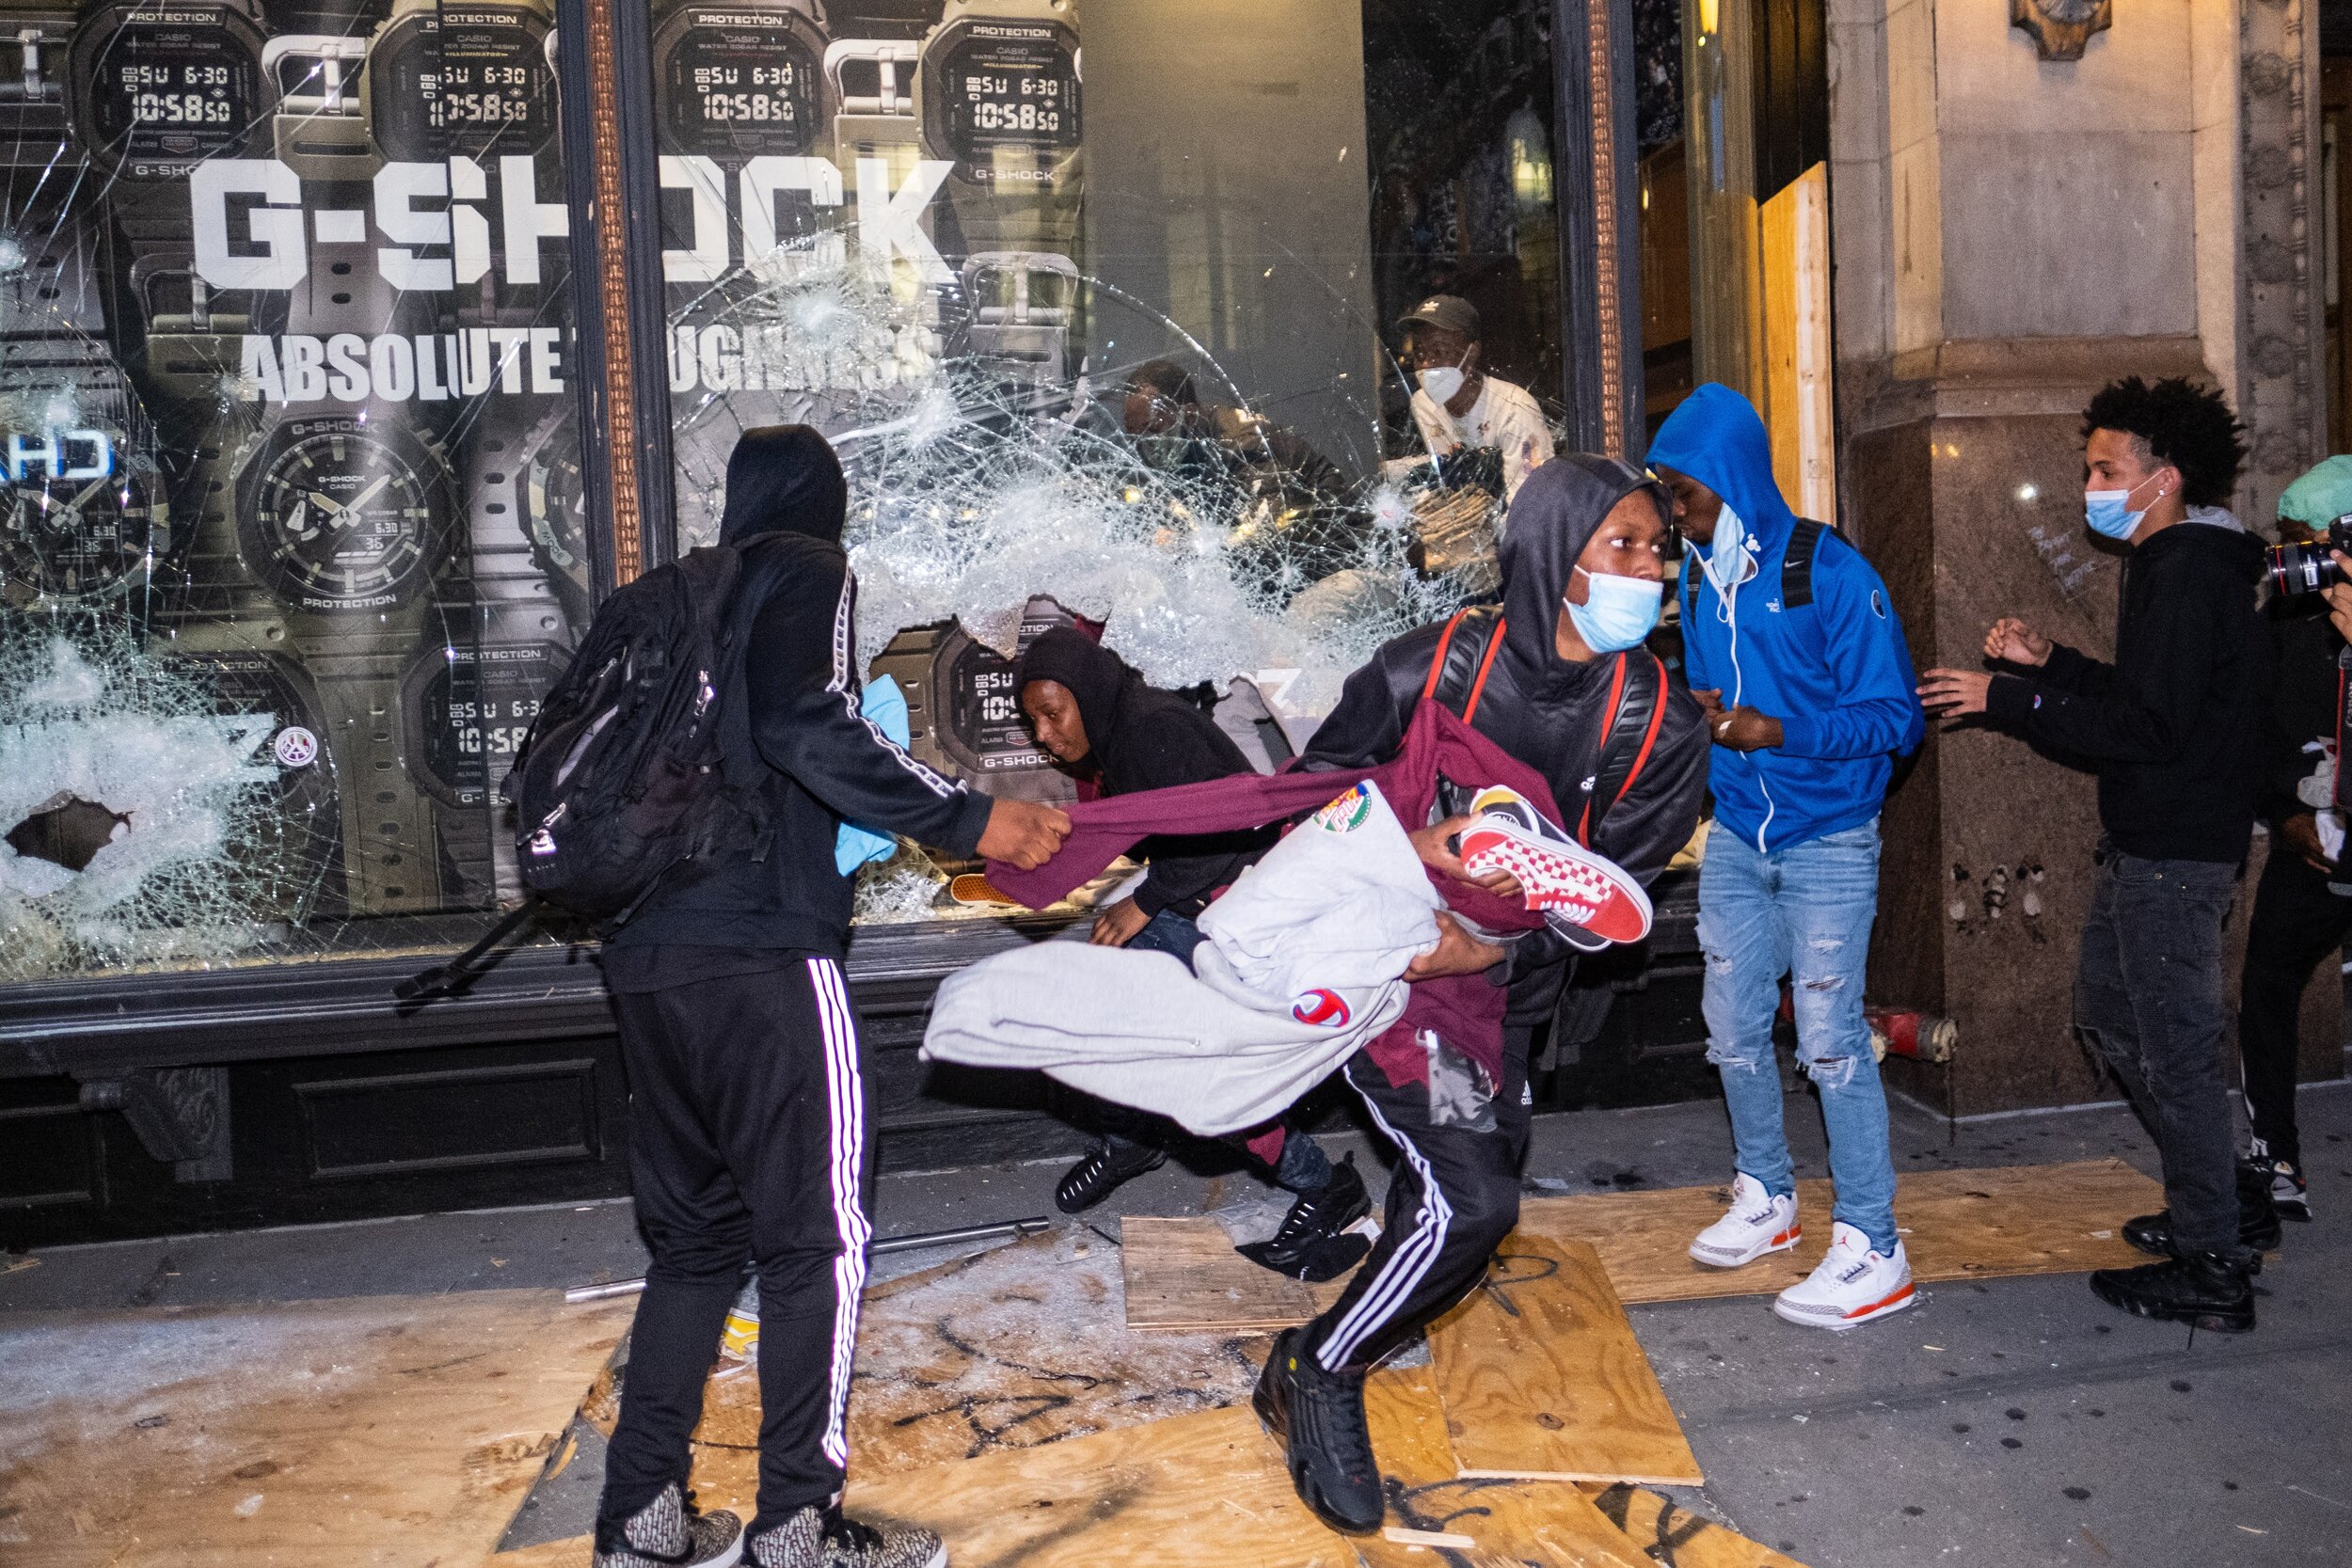  June 1, 2020: New York, NY -   People take goods from a clothing store during widespread looting in Manhattan after George Floyd was killed while being detained by Minneapolis police on May 25.  